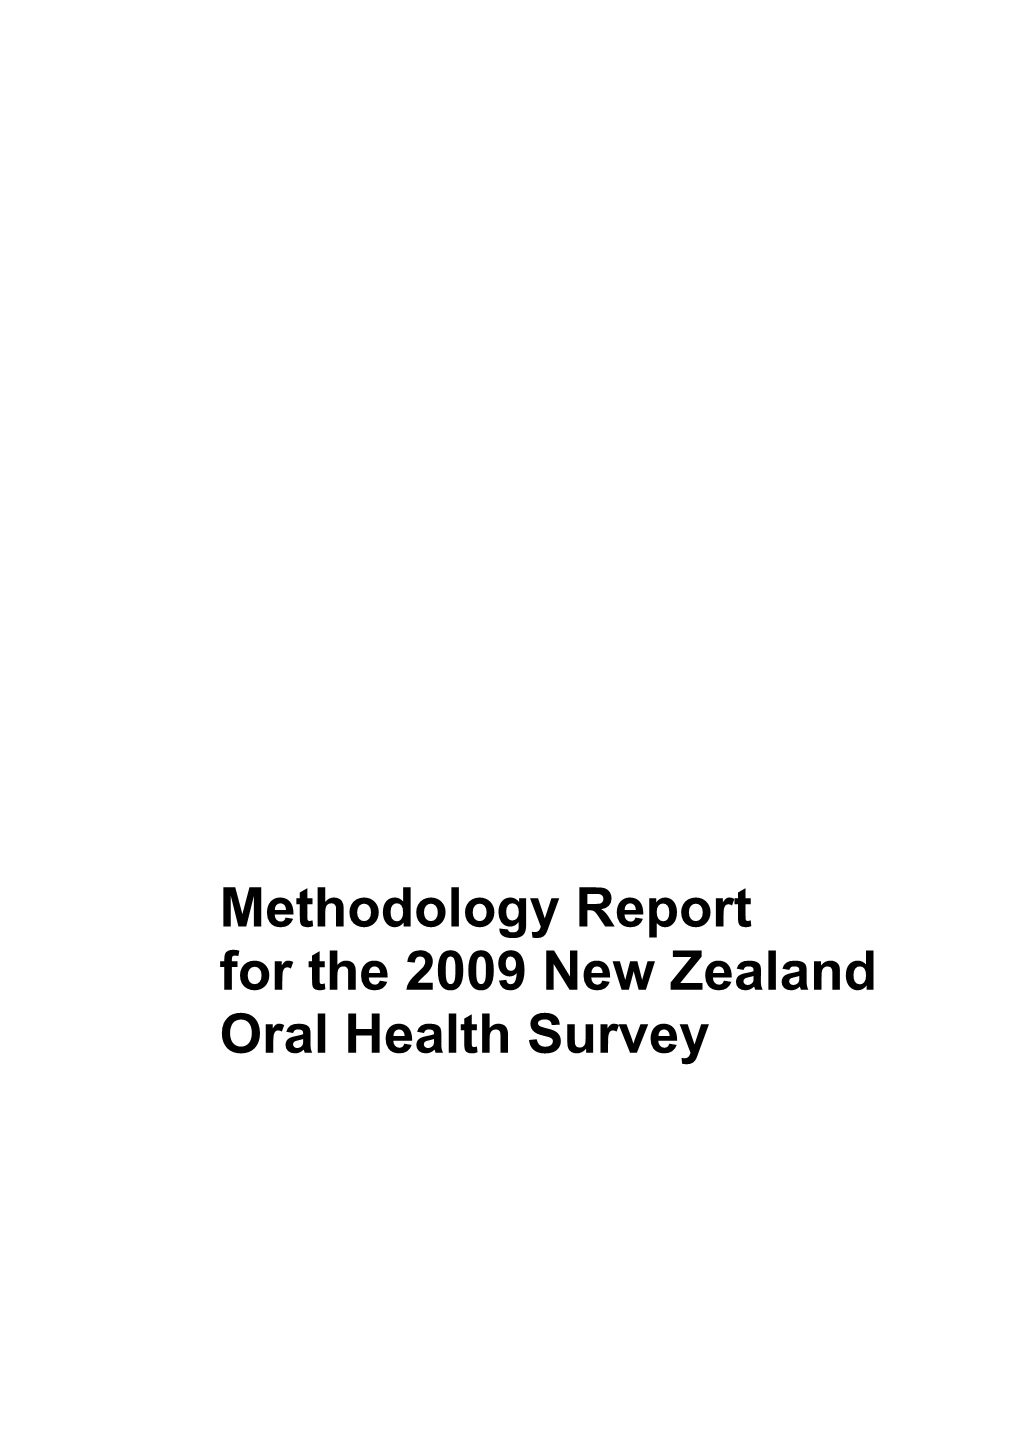 Methodology Report for the 2009 New Zealand Oral Health Survey